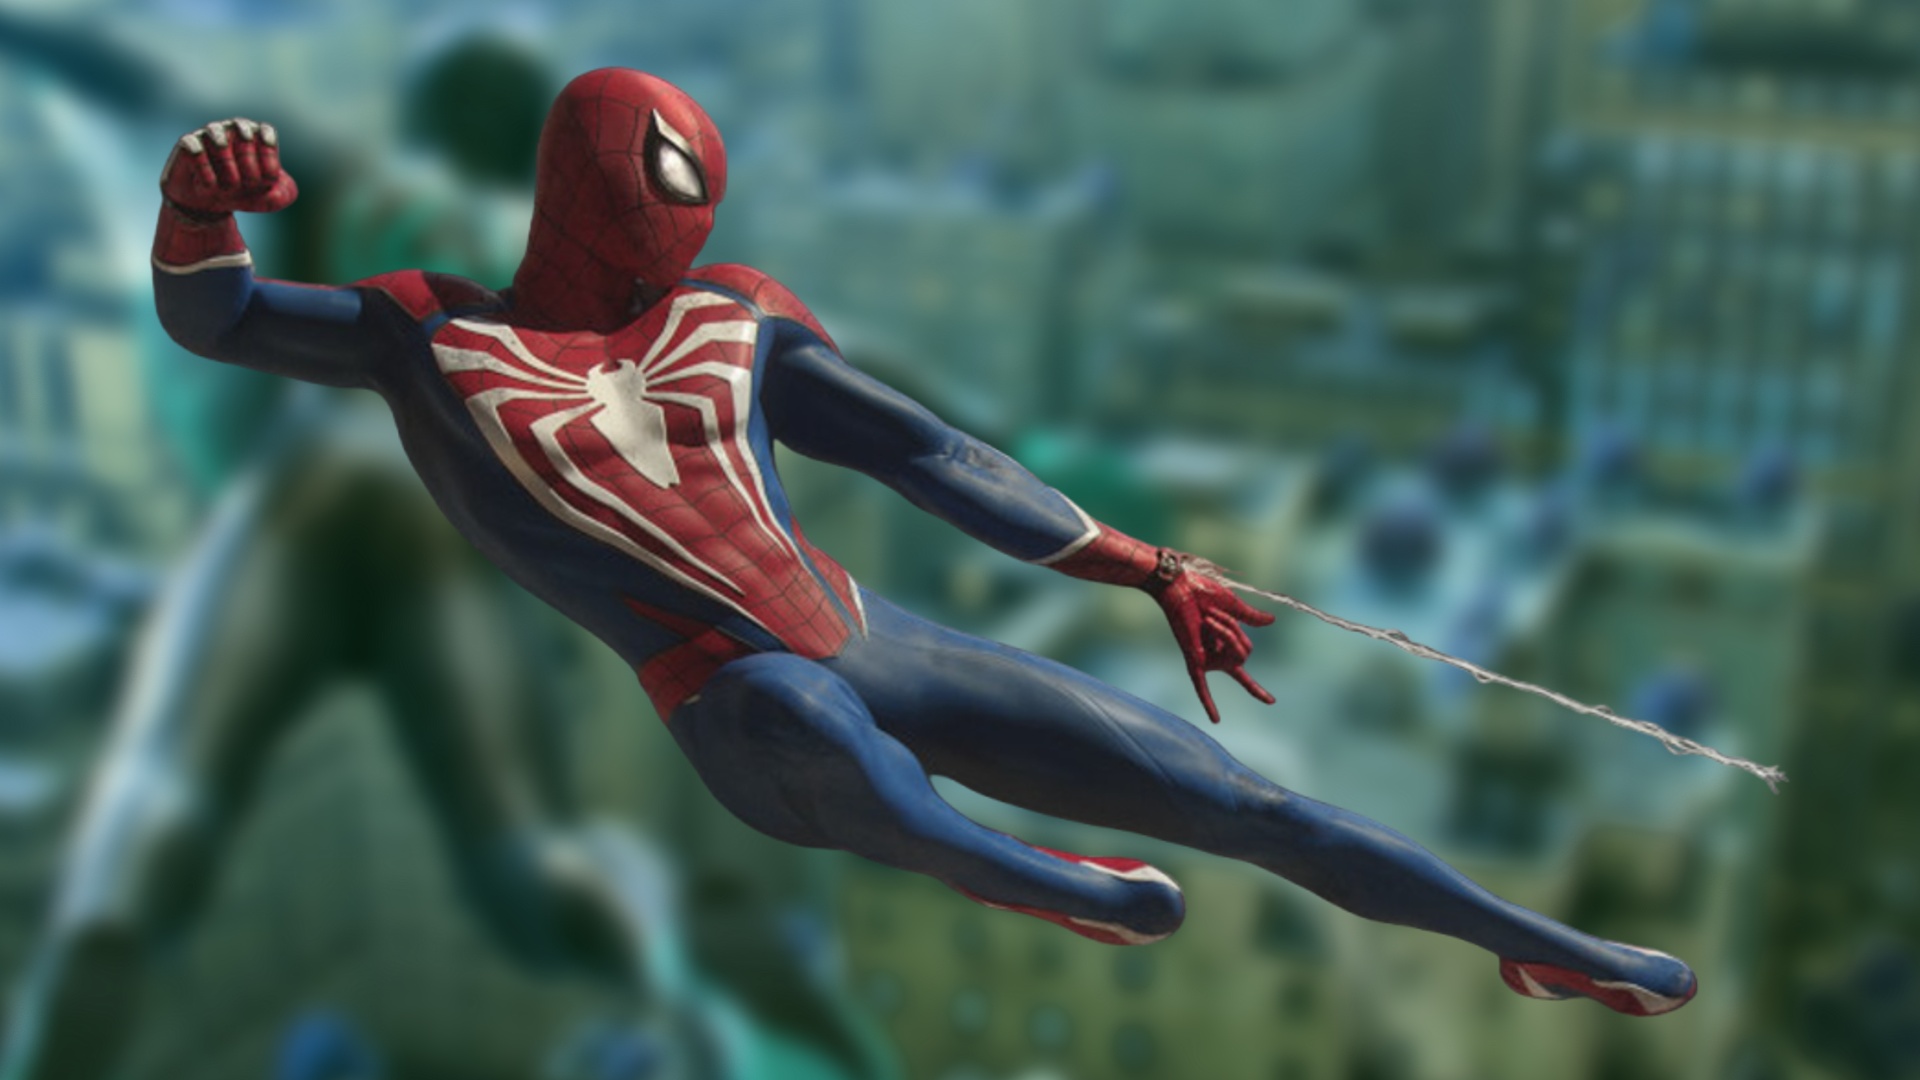 Spider-Man PS4 Suits - Marvel's Spider-Man Guide - IGN